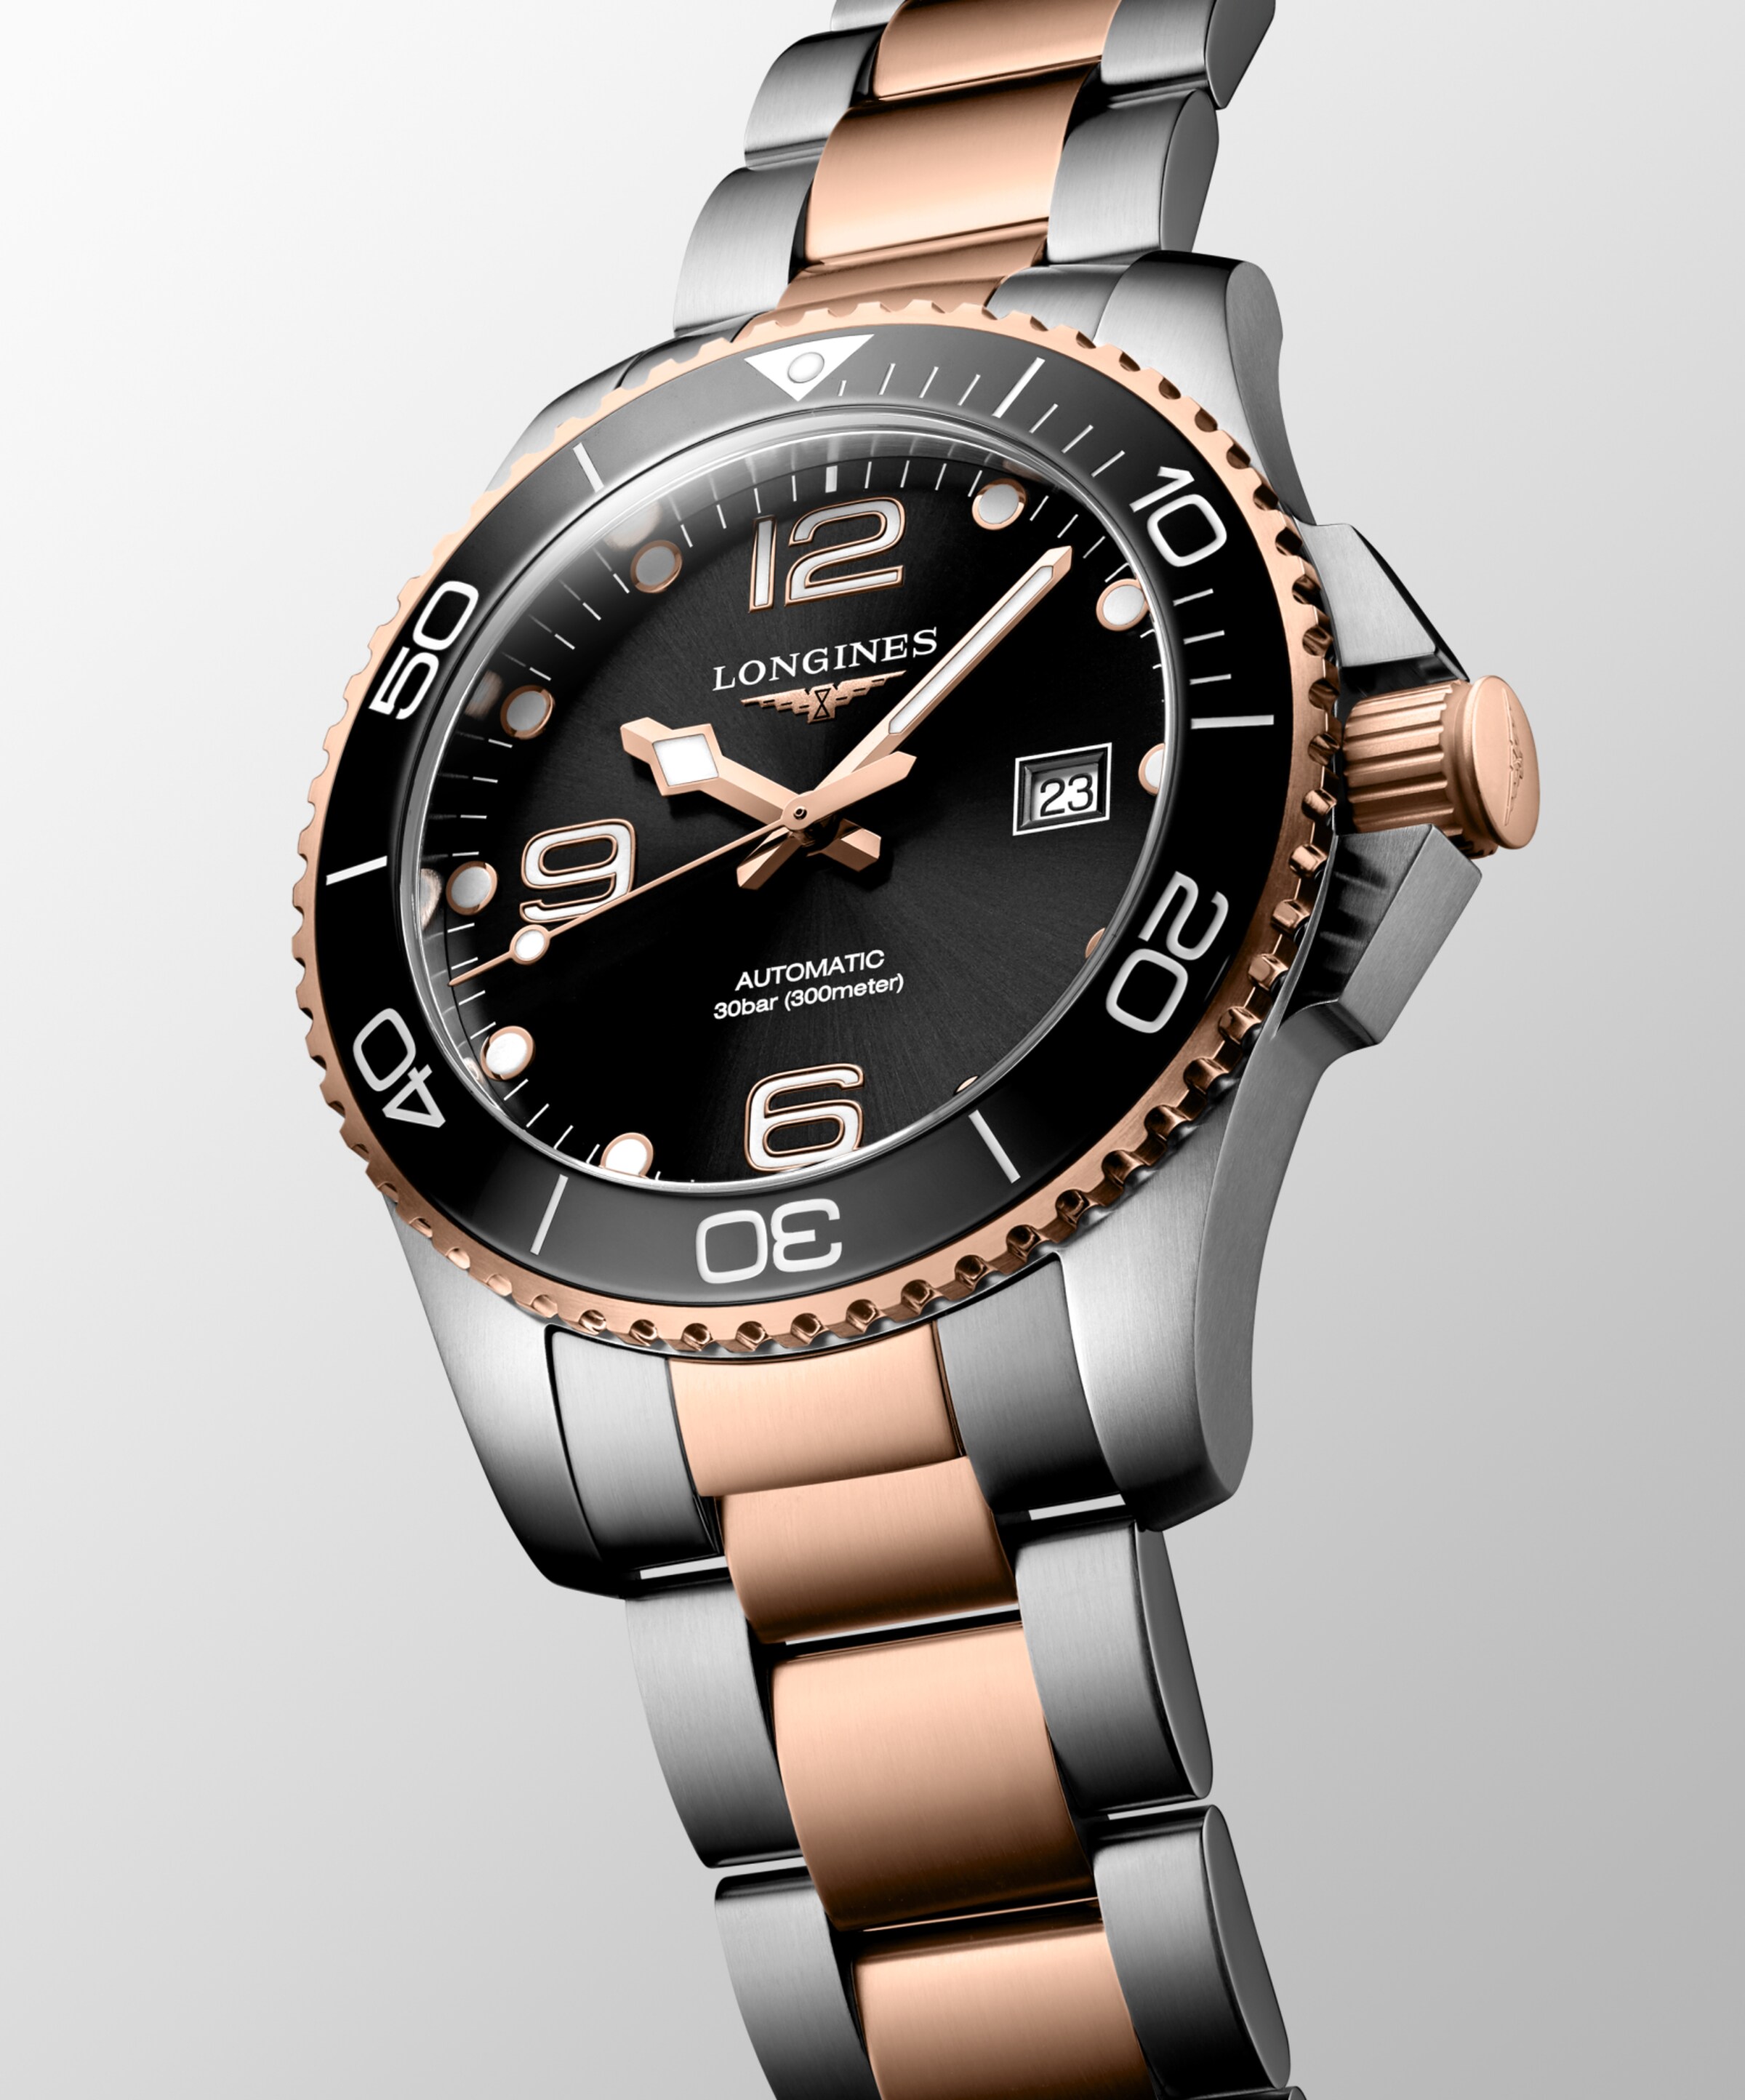 Longines HYDROCONQUEST Automatic Stainless steel and ceramic bezel Watch - L3.782.3.58.7